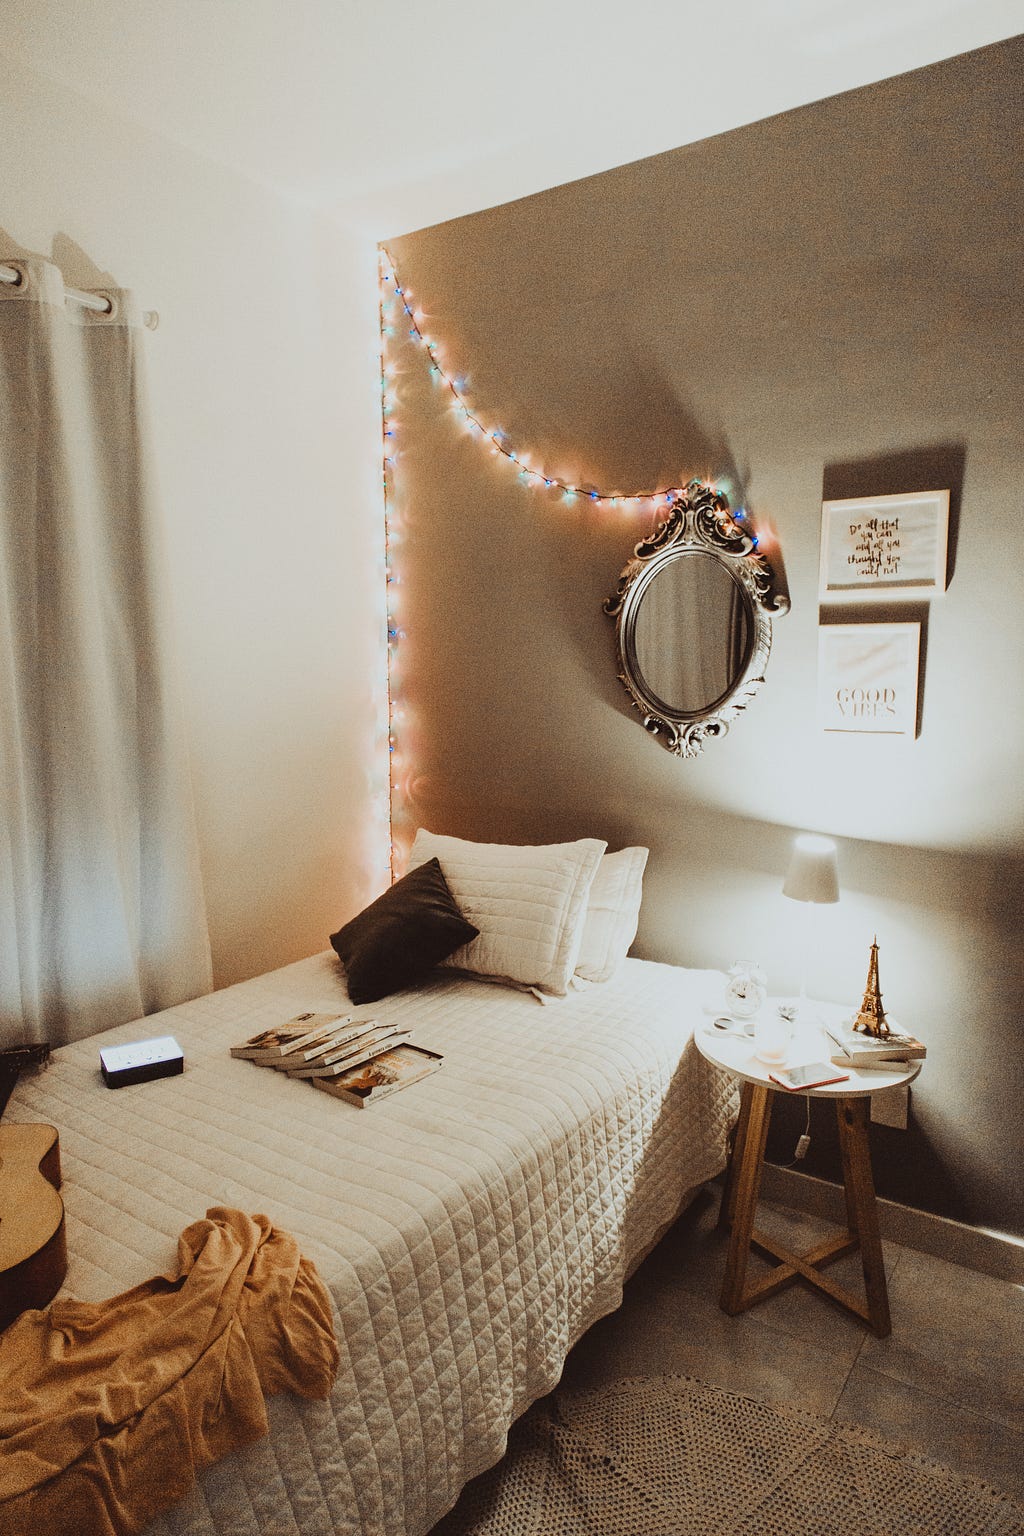 Use of fairy light and Ambient light for aesthetic bedroom design